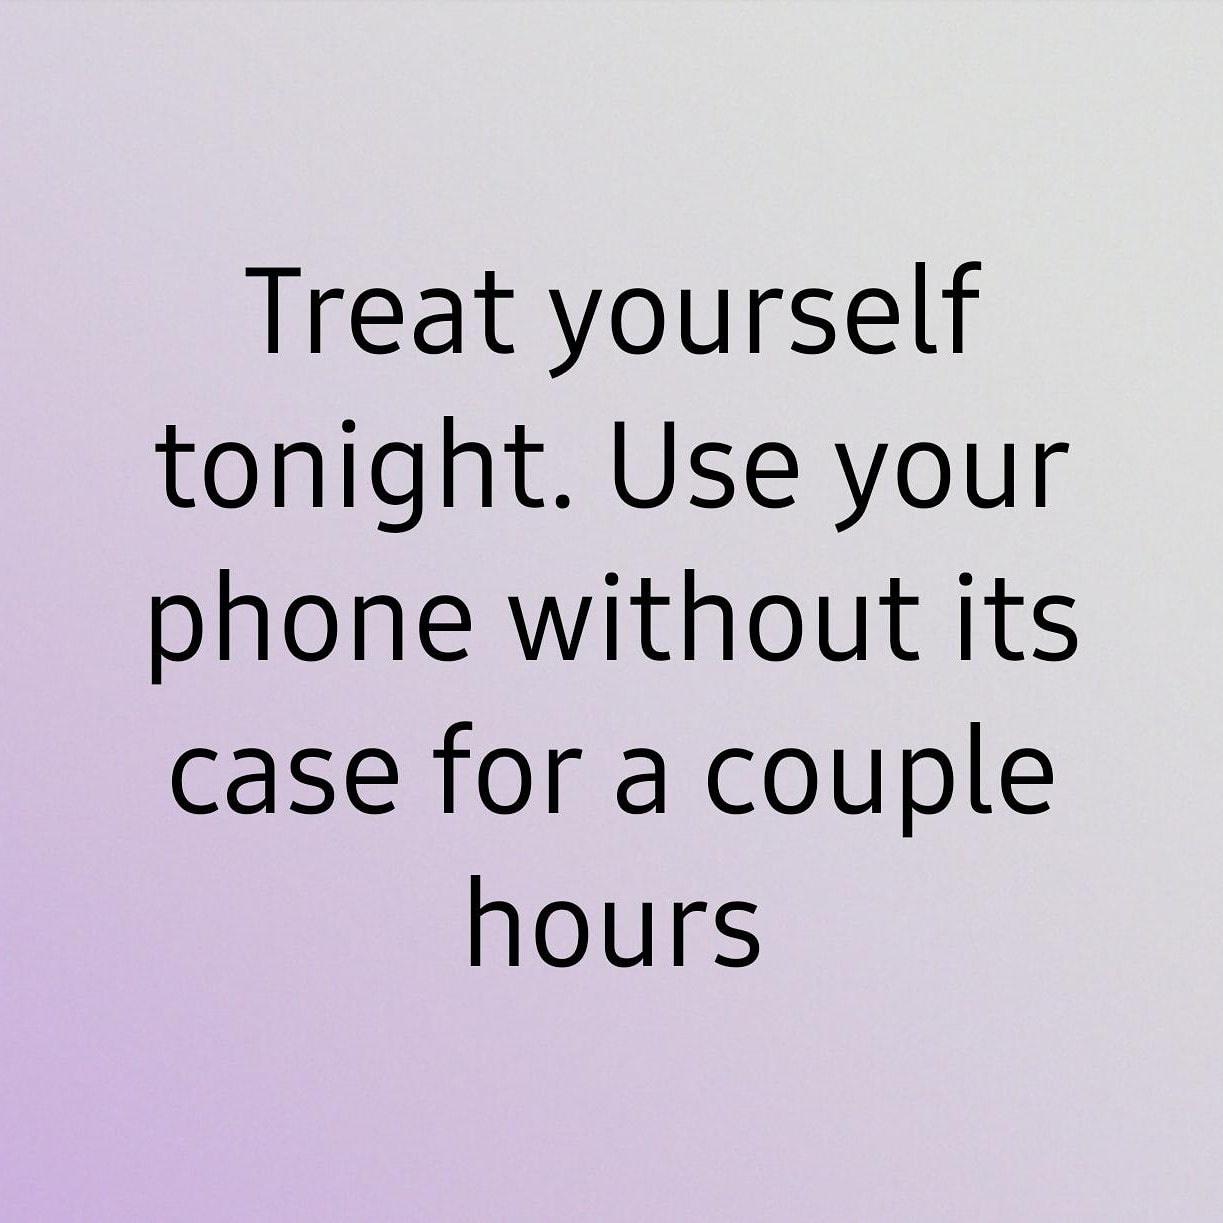 airtel - Treat yourself tonight. Use your phone without its case for a couple hours